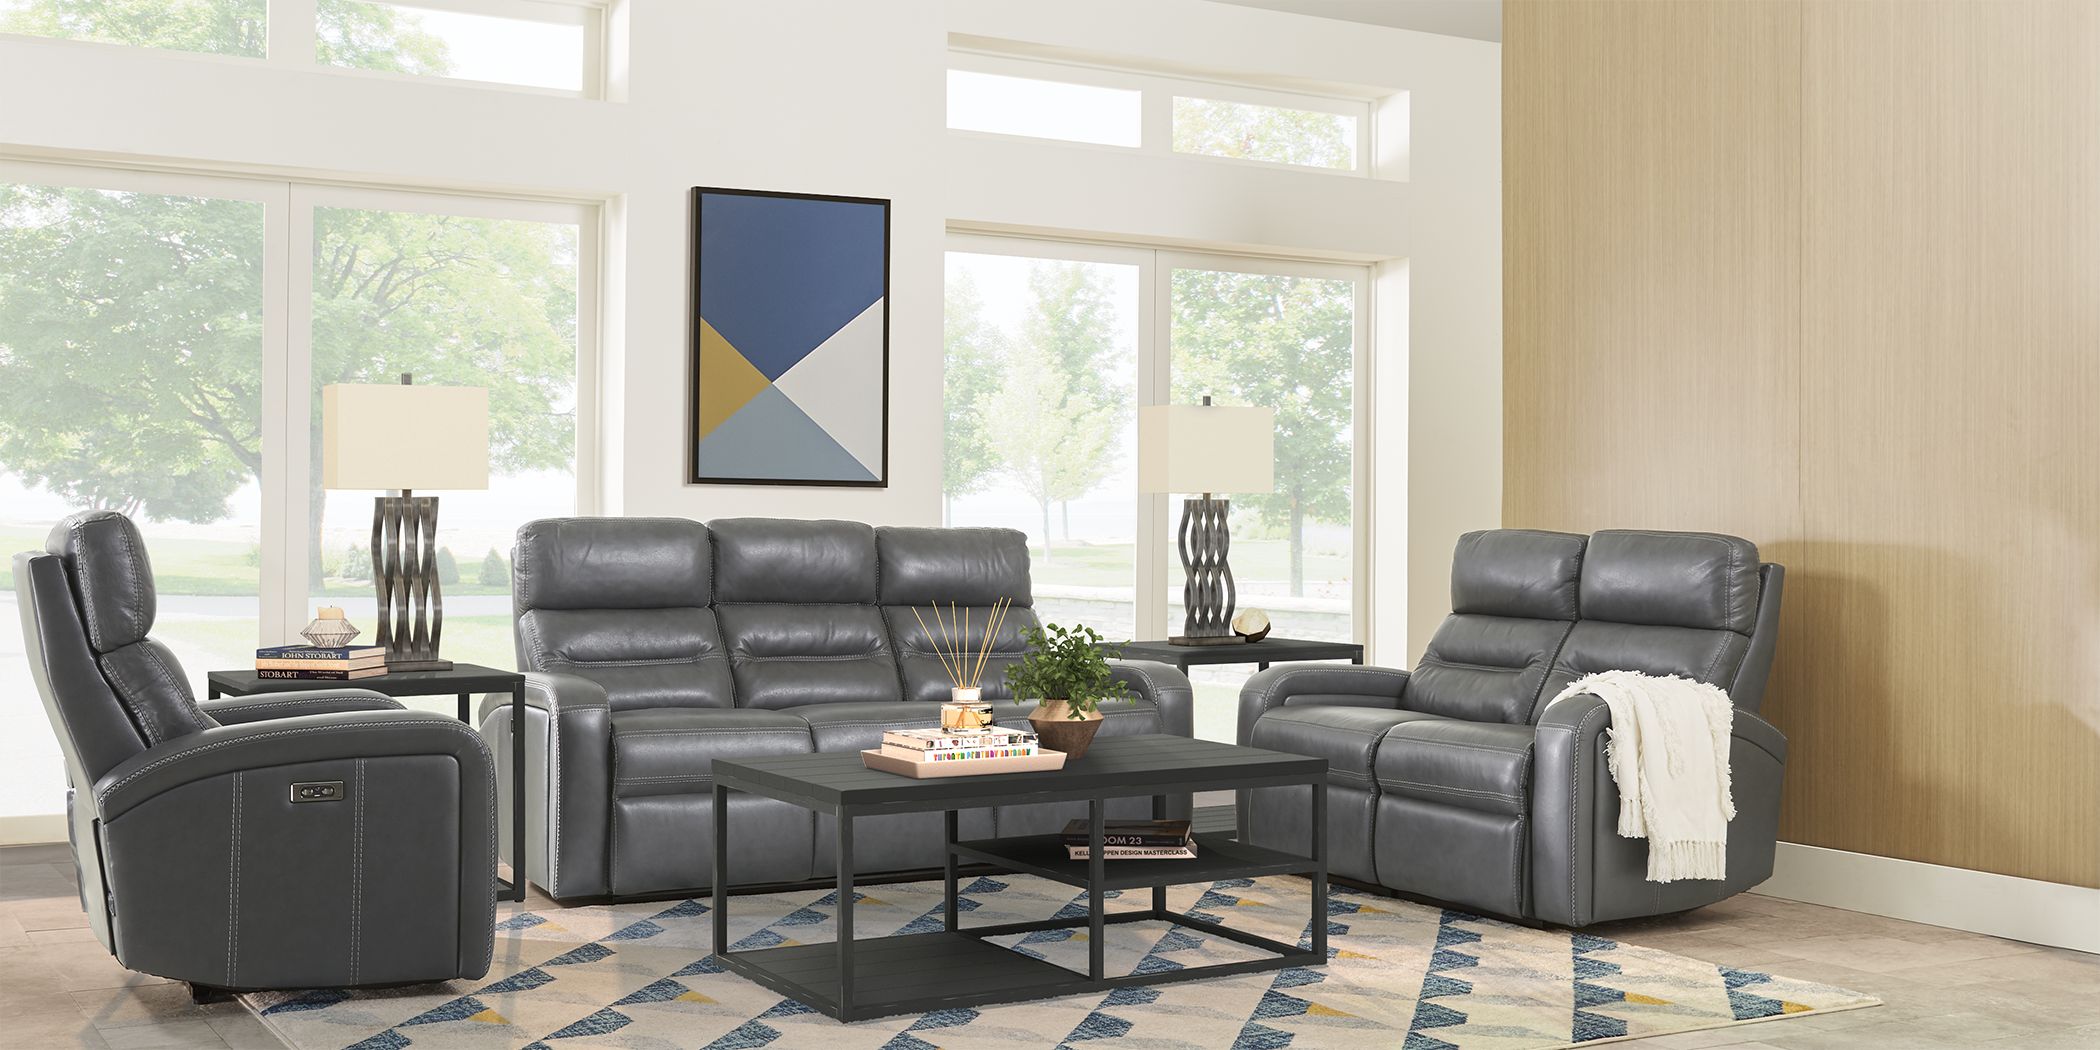 Sierra Madre Gray Leather 5 Pc Living Room with Reclining Sofa